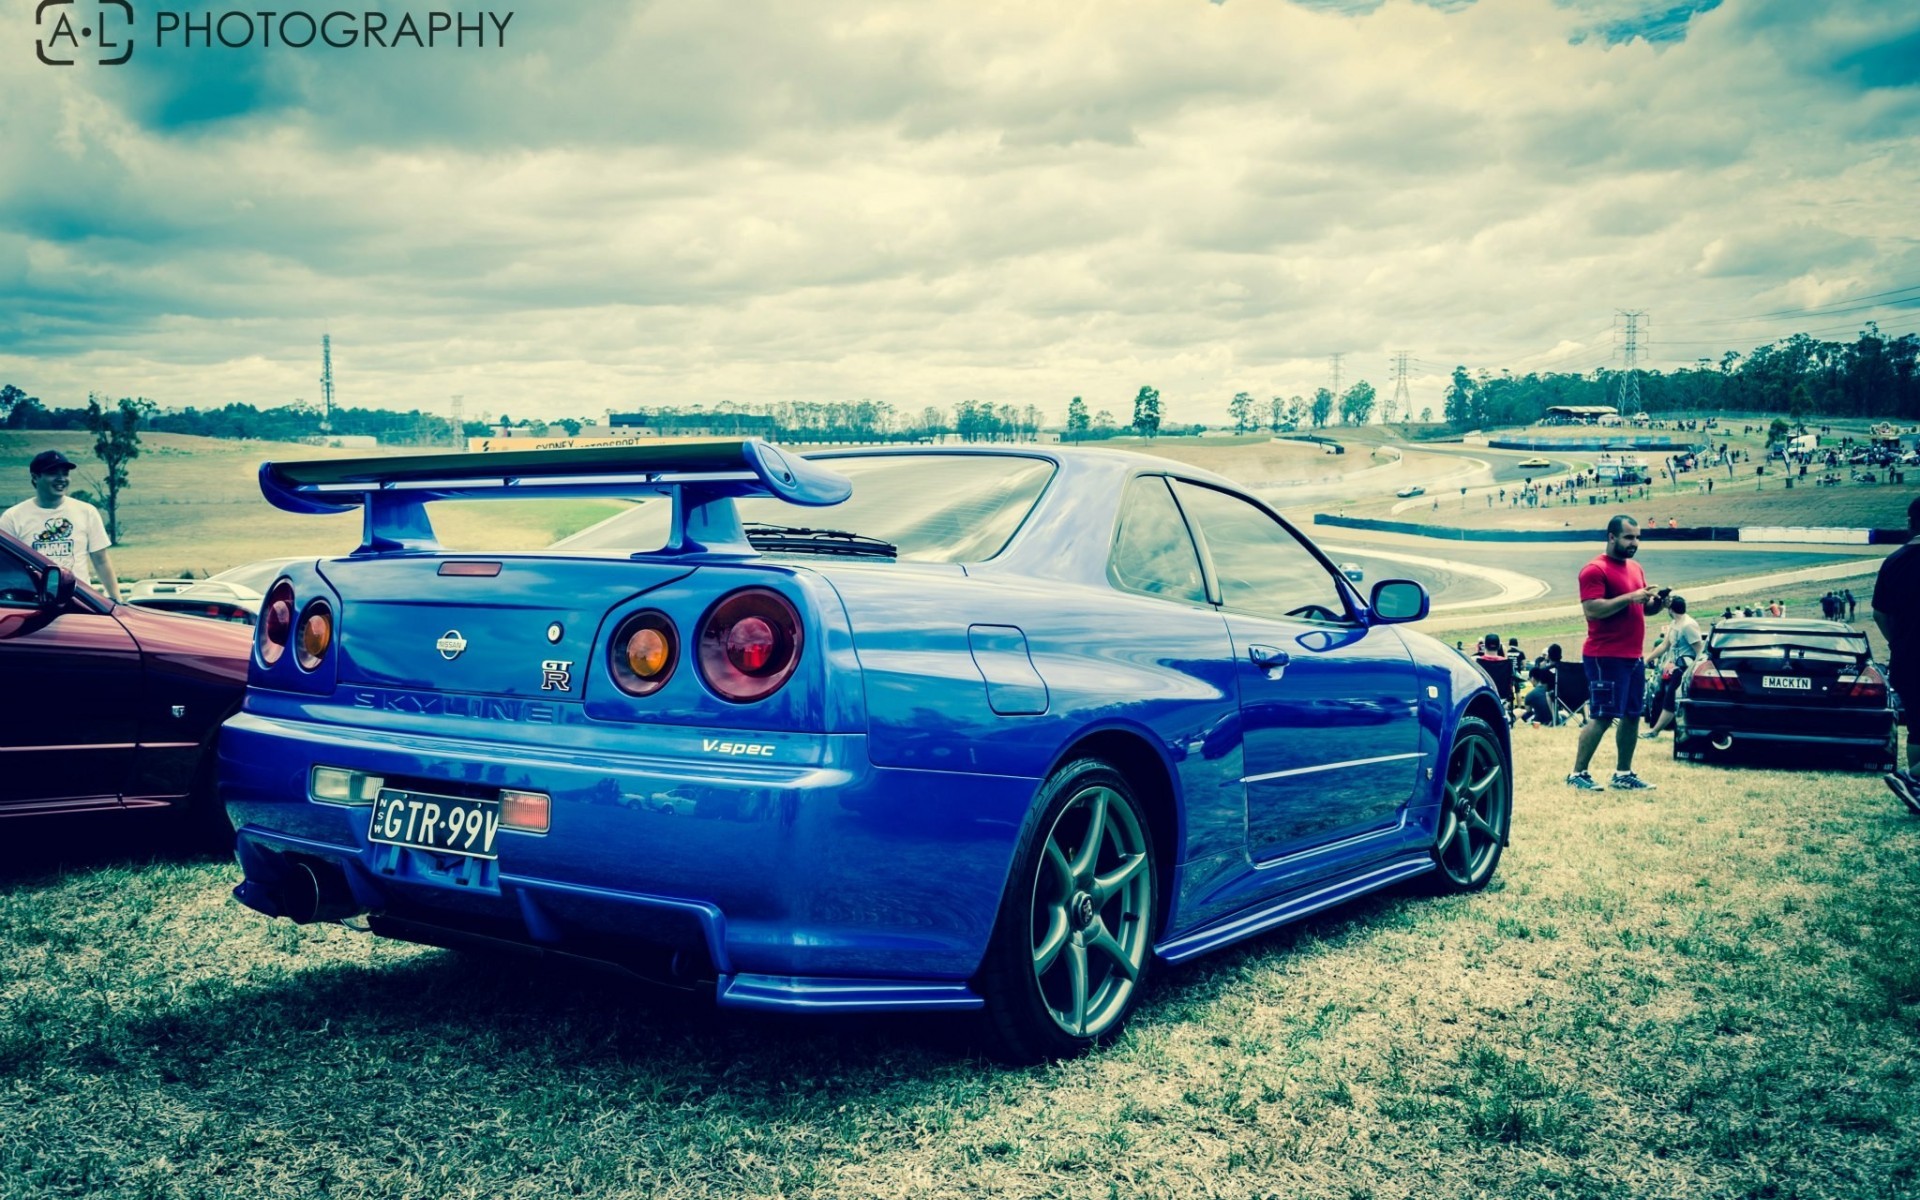 1920x1200 #720x1280 #Wallpaper #nissan, #skyline, #gt-r, #r34, #nismo, #s-tune  #mobile_background #mobile #background #samsung #Note2 | Mobile Background  | Pinterest ...